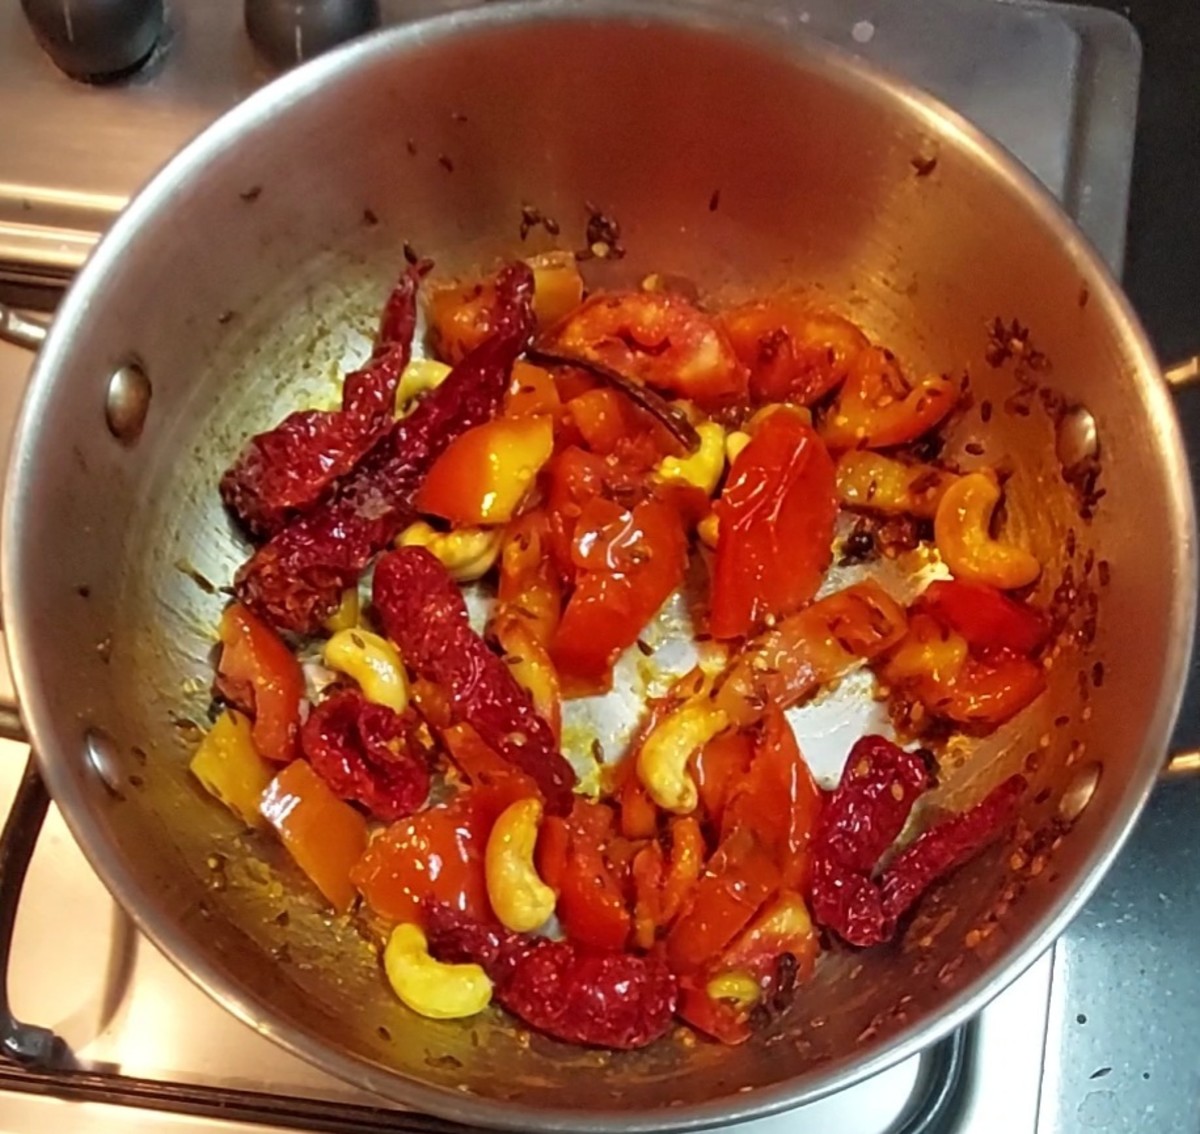 Fry for a minute, close the lid and cook over low flame till tomato shrinks and is well-cooked. Add salt, mix well and switch off the flame. Let the mixture cool down completely.